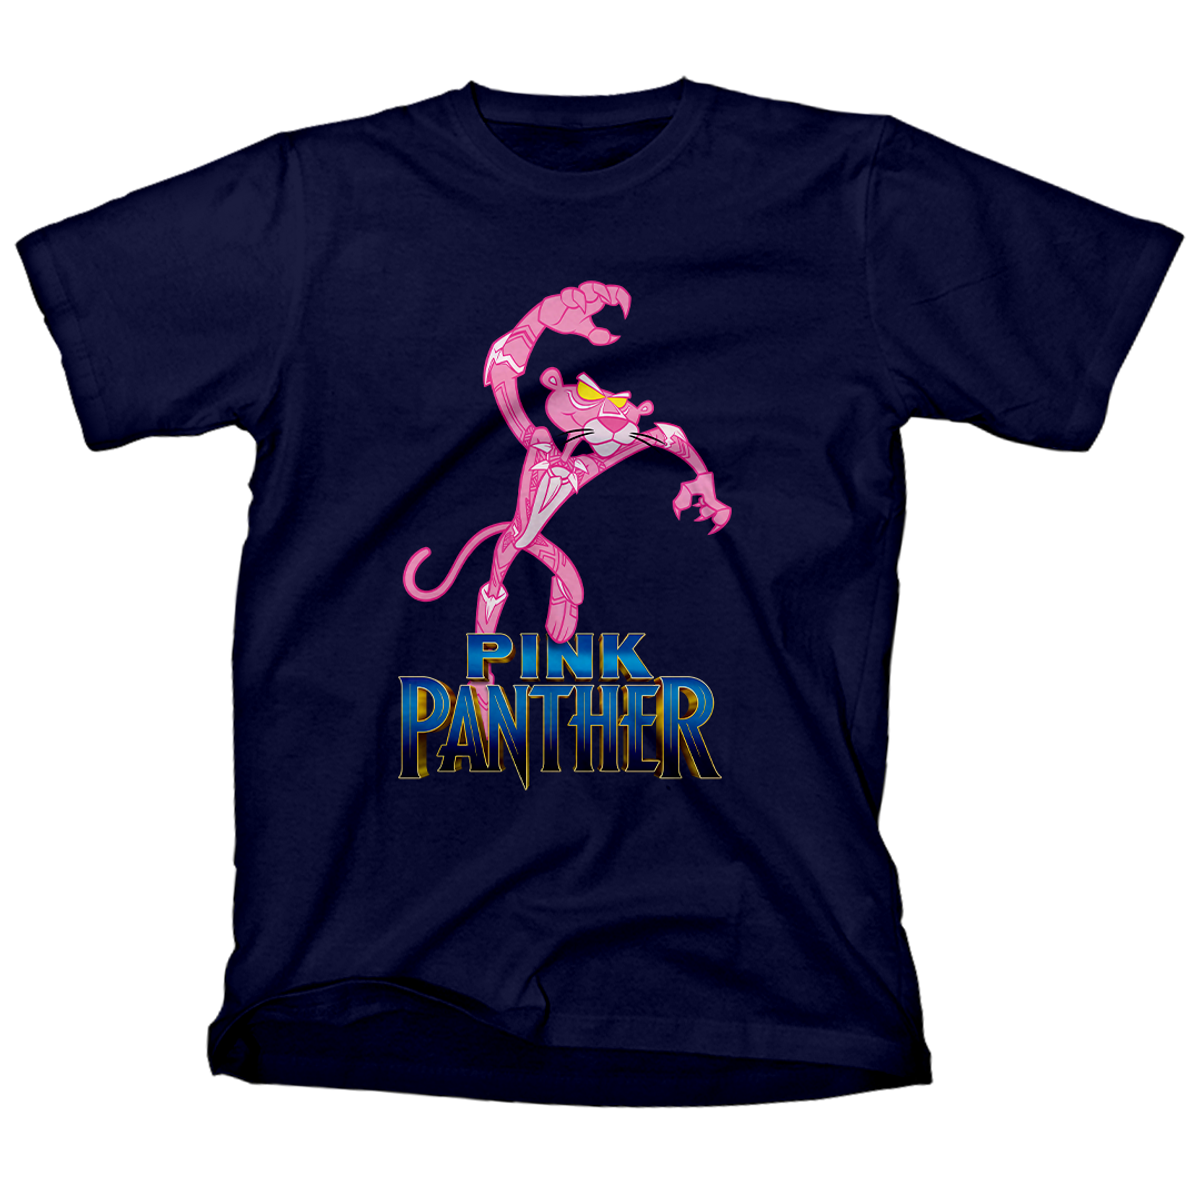 Nome do produto: Pink Panther <br>[T-Shirt Quality]</br>